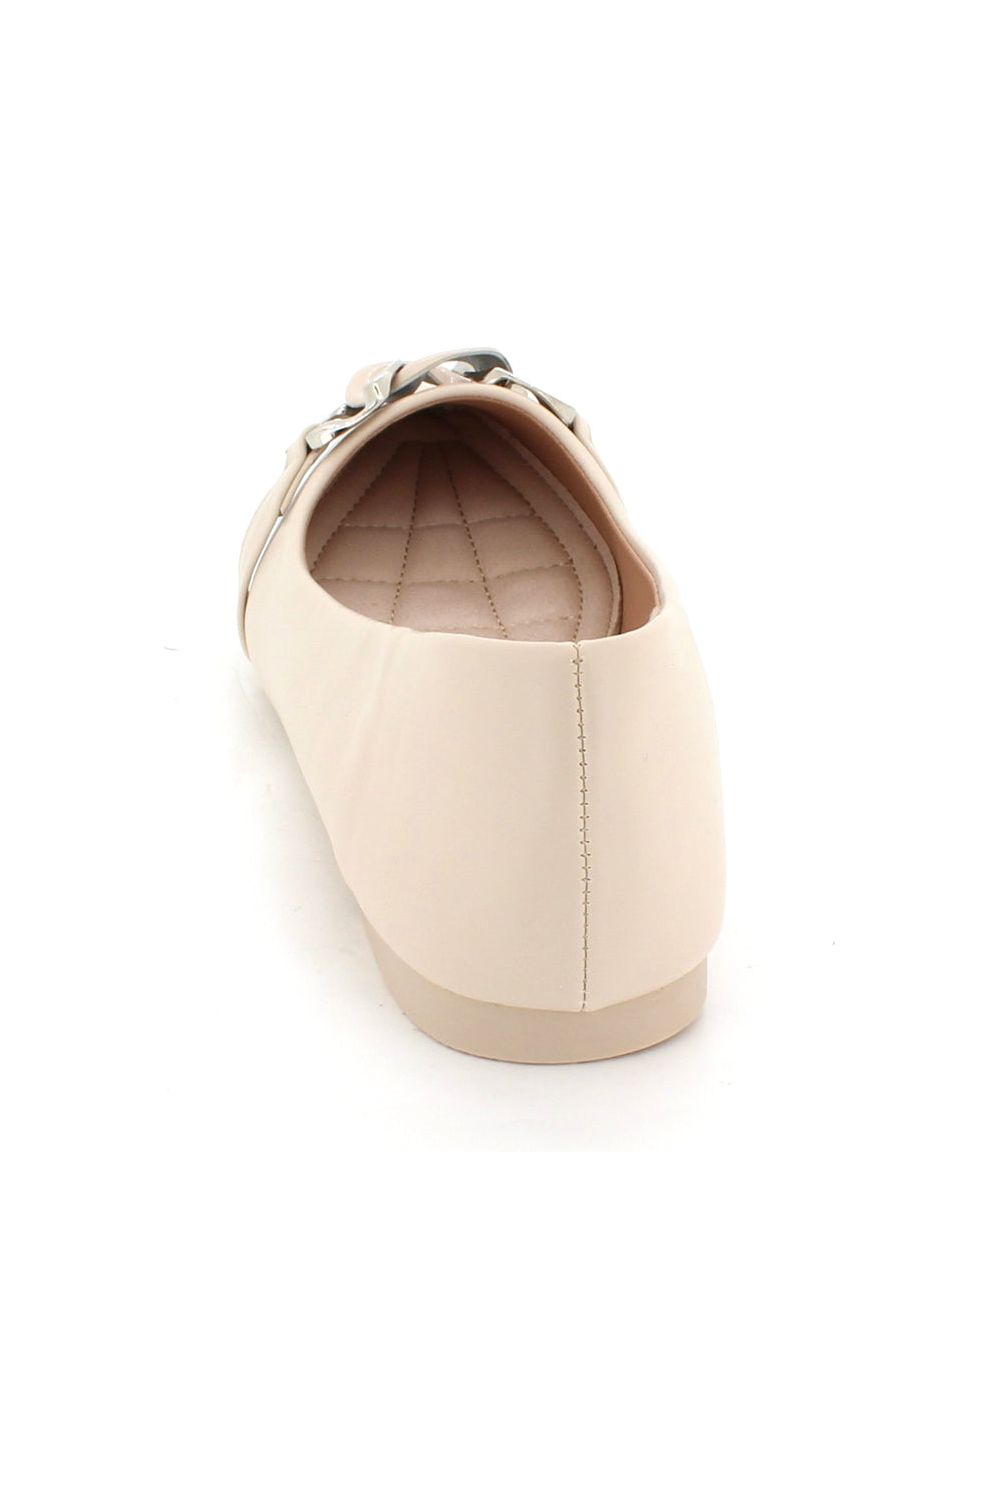 Everyday Ballerinas Essential Padded Sole Comfort Casual Pump Slip-On Pointed Toe Ballet L8008